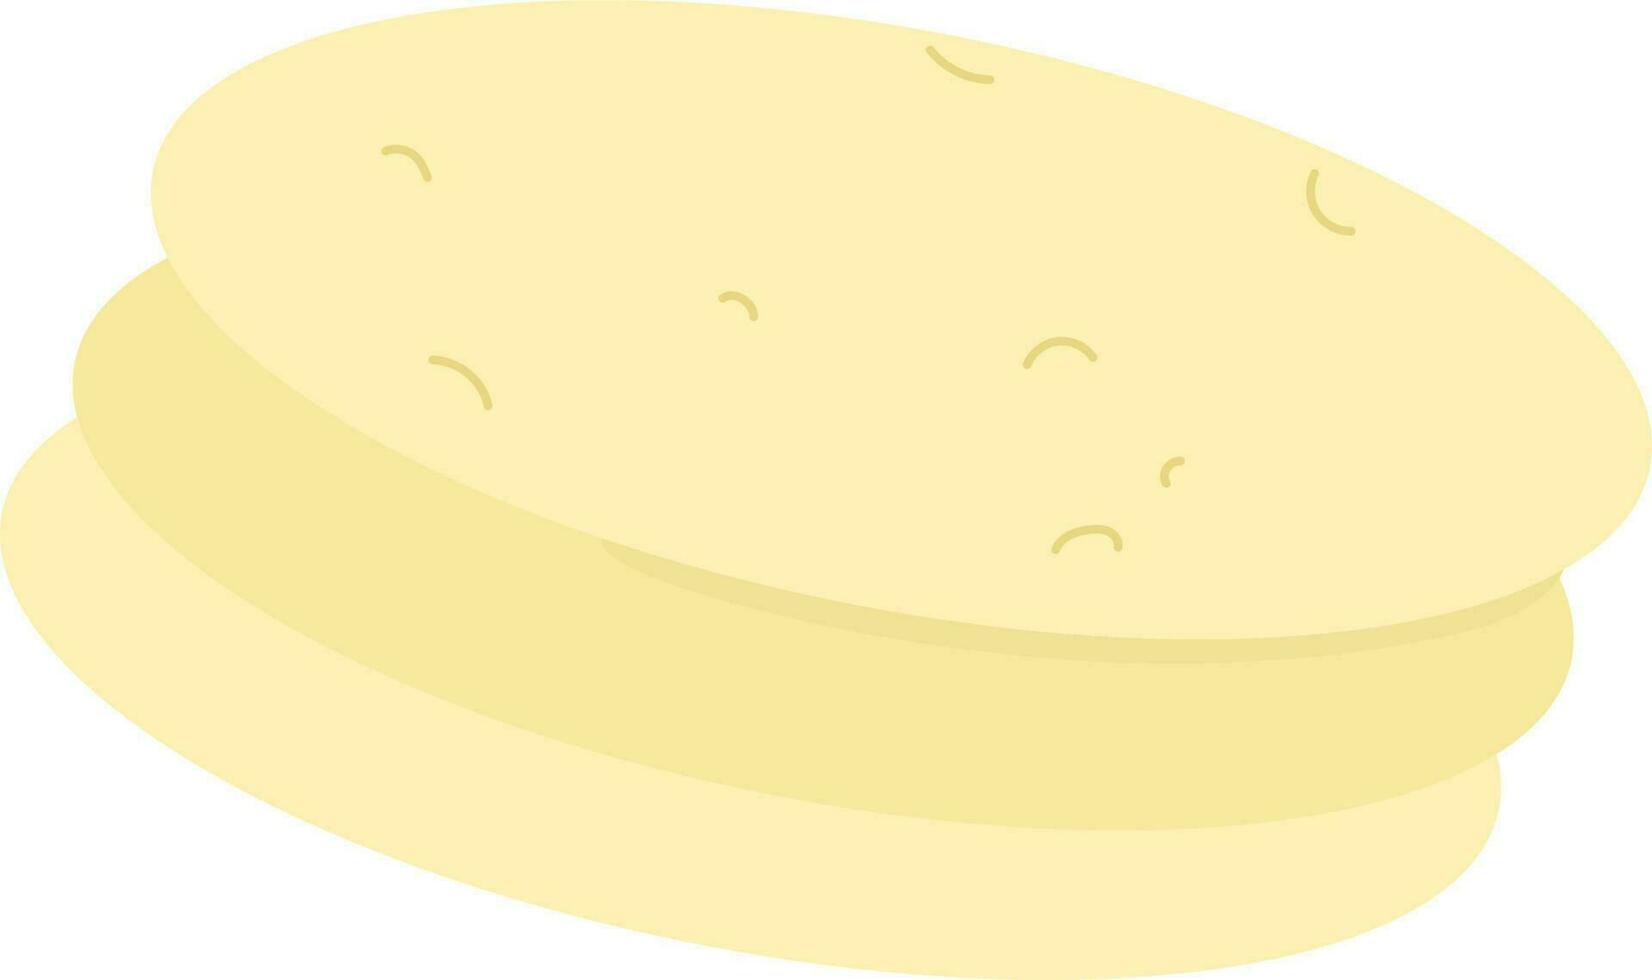 Isolated Canai Roti Flatbread Icon In Flat Style. vector